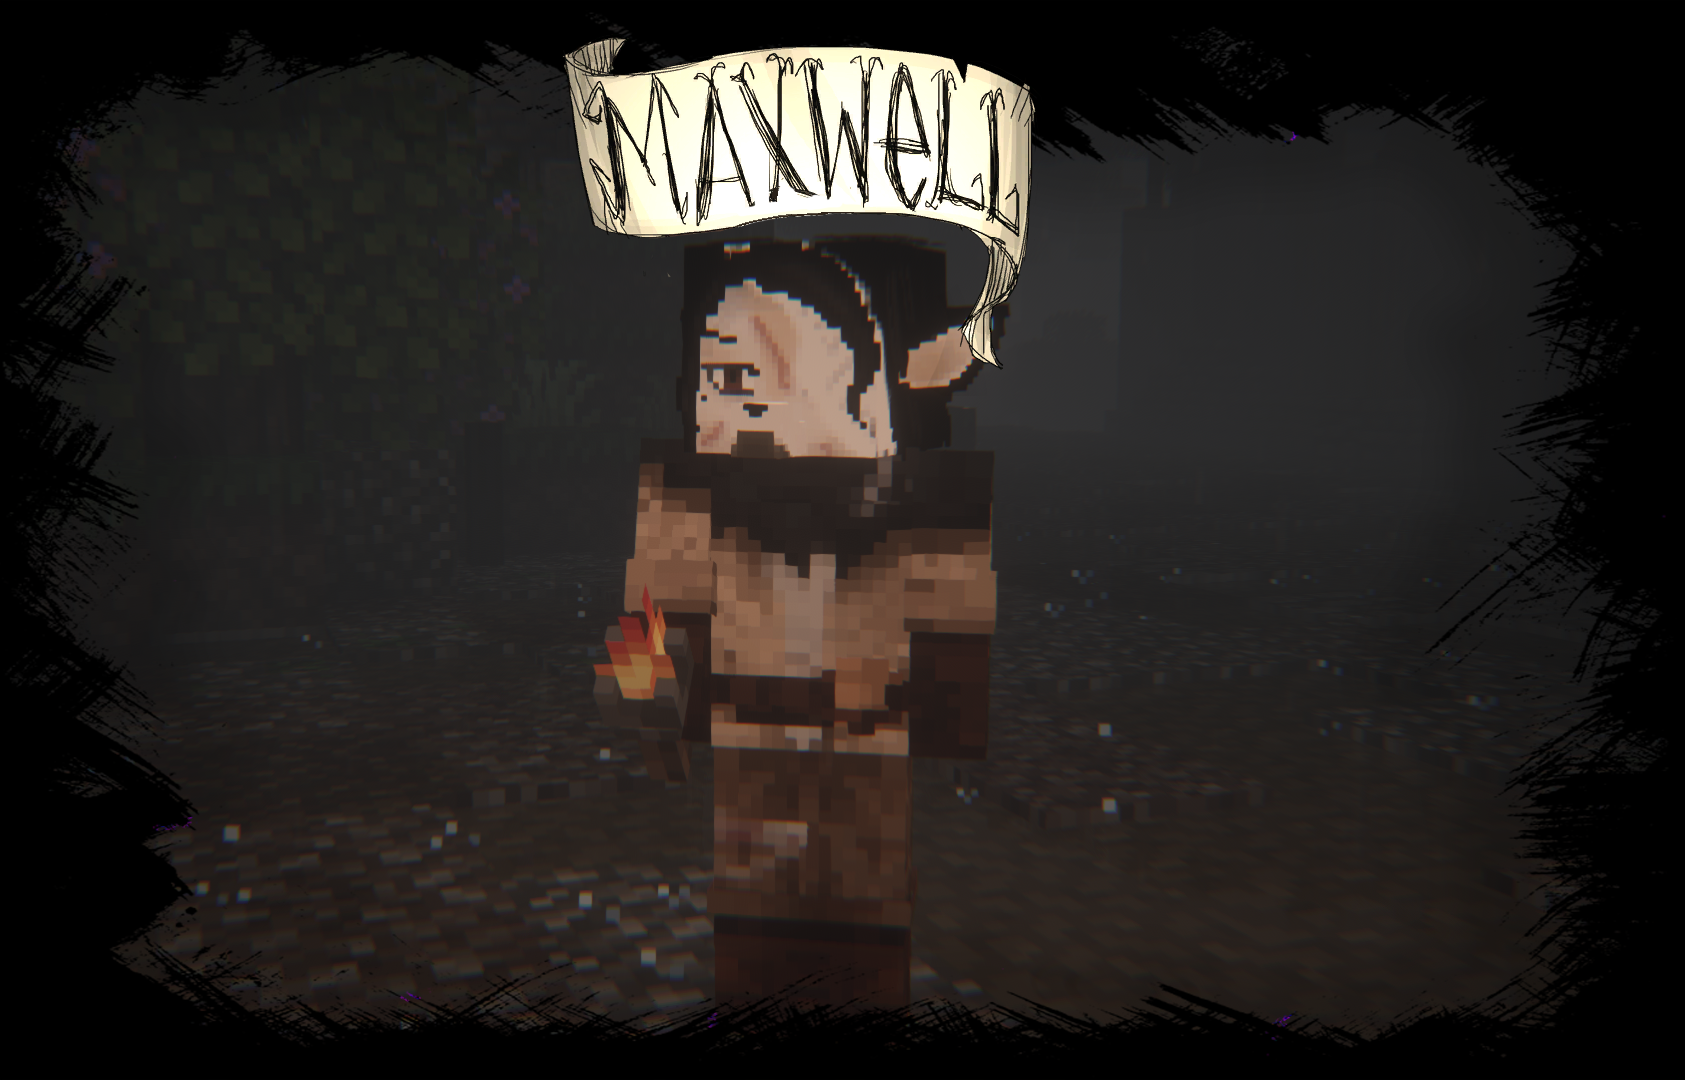 MAXWELL_PHOTO.png